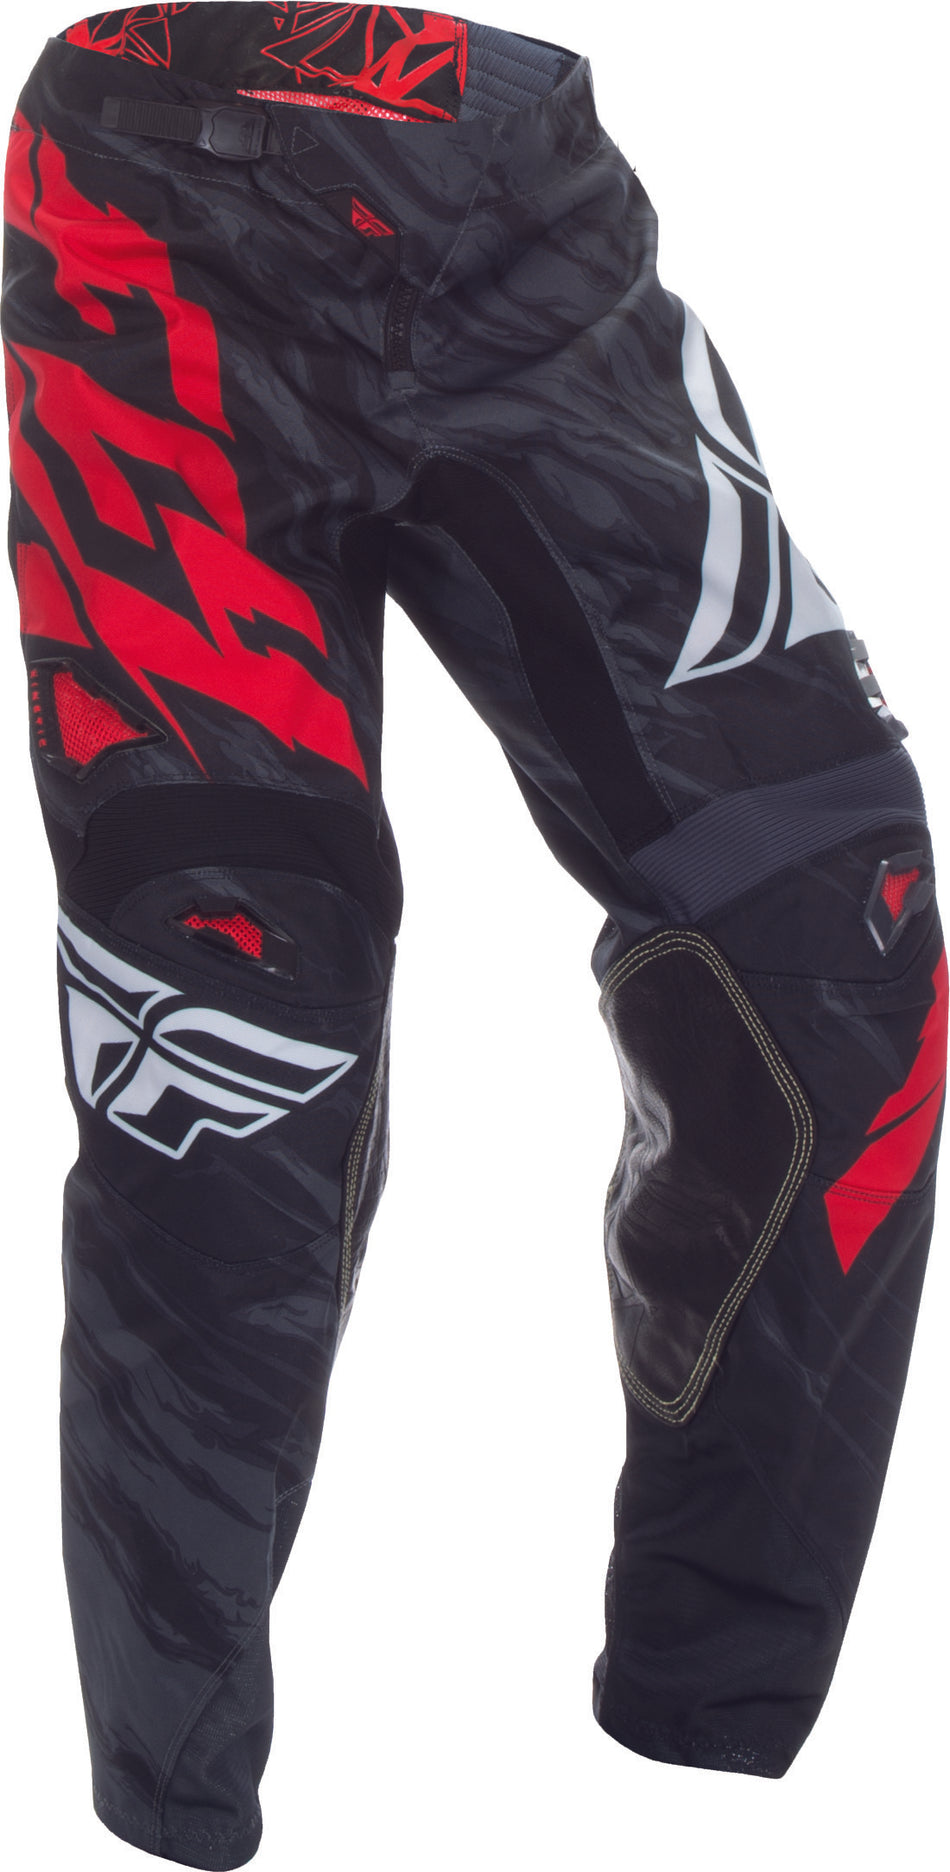 FLY RACING Kinetic Relapse Pant Black/Red Sz 30 370-43030